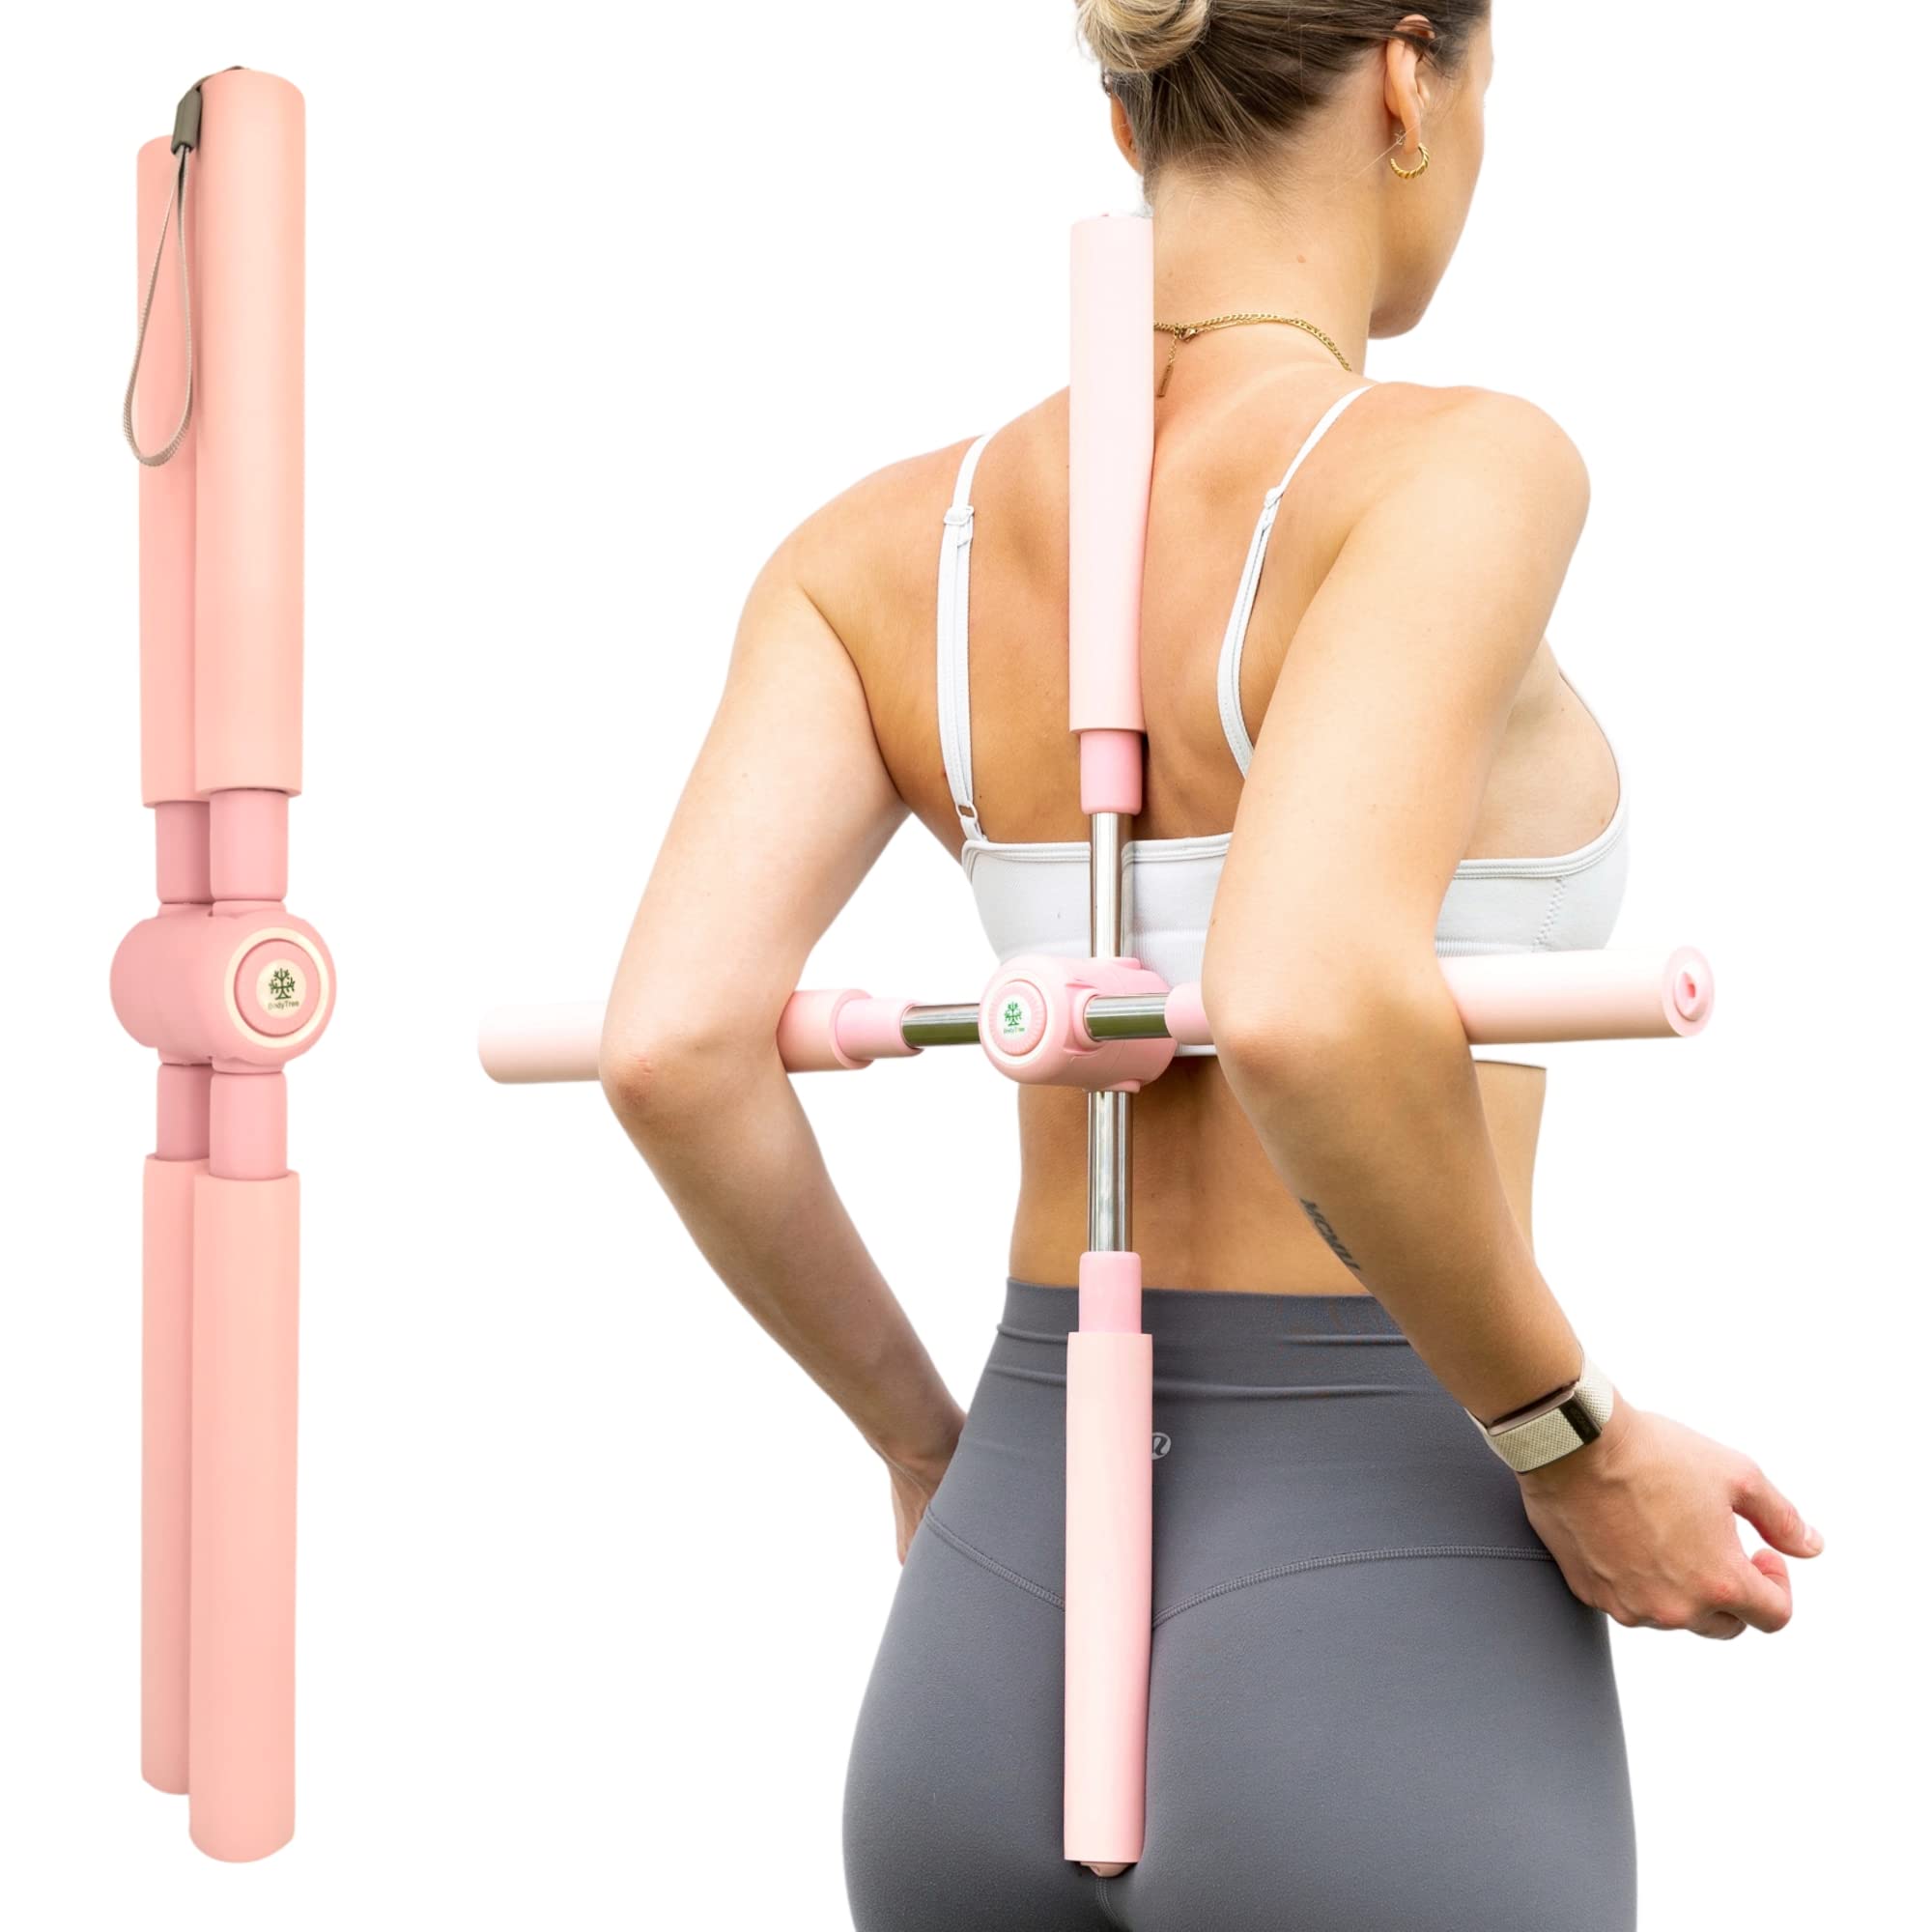 BodyTree Posture Corrector Yoga Cross Stick - Compact and Adjustable  Stretch Pole - Cracker bar - Stretcher for Upper and Lower Back Pain Relief  Pink